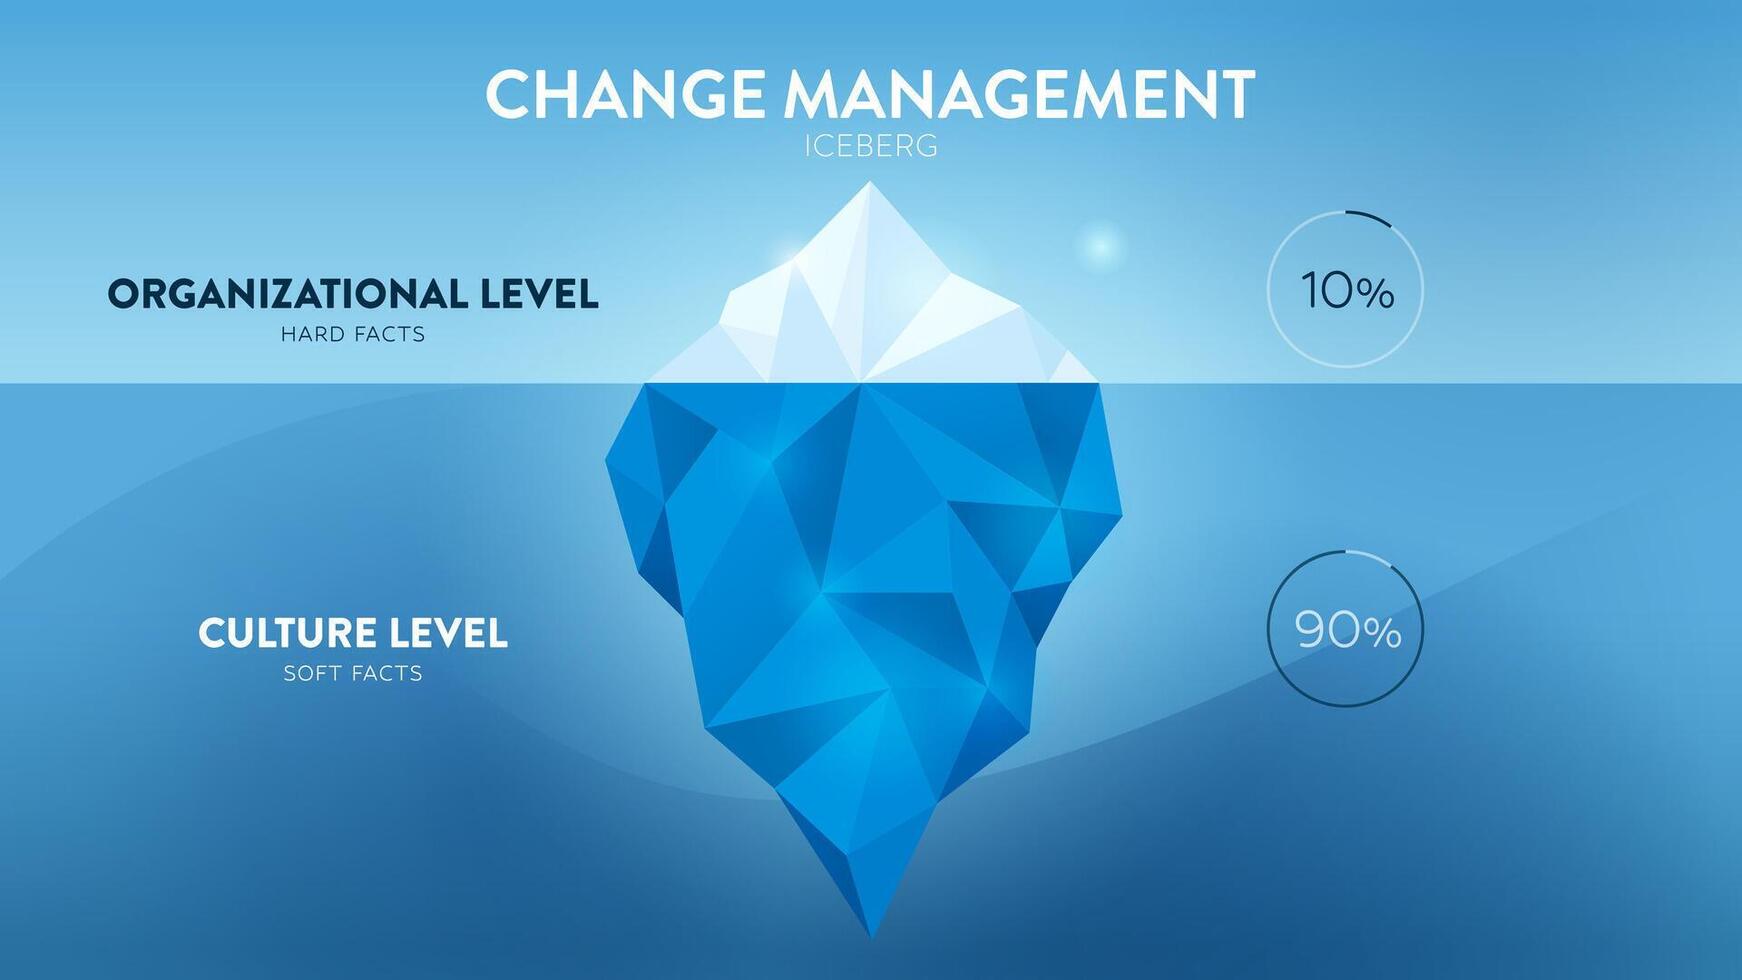 Iceberg Model of Change Management vector illustration is 90 soft fact culture level hidden underwater and 10 hard fact organization level. The infographic is for human resource management strategy.